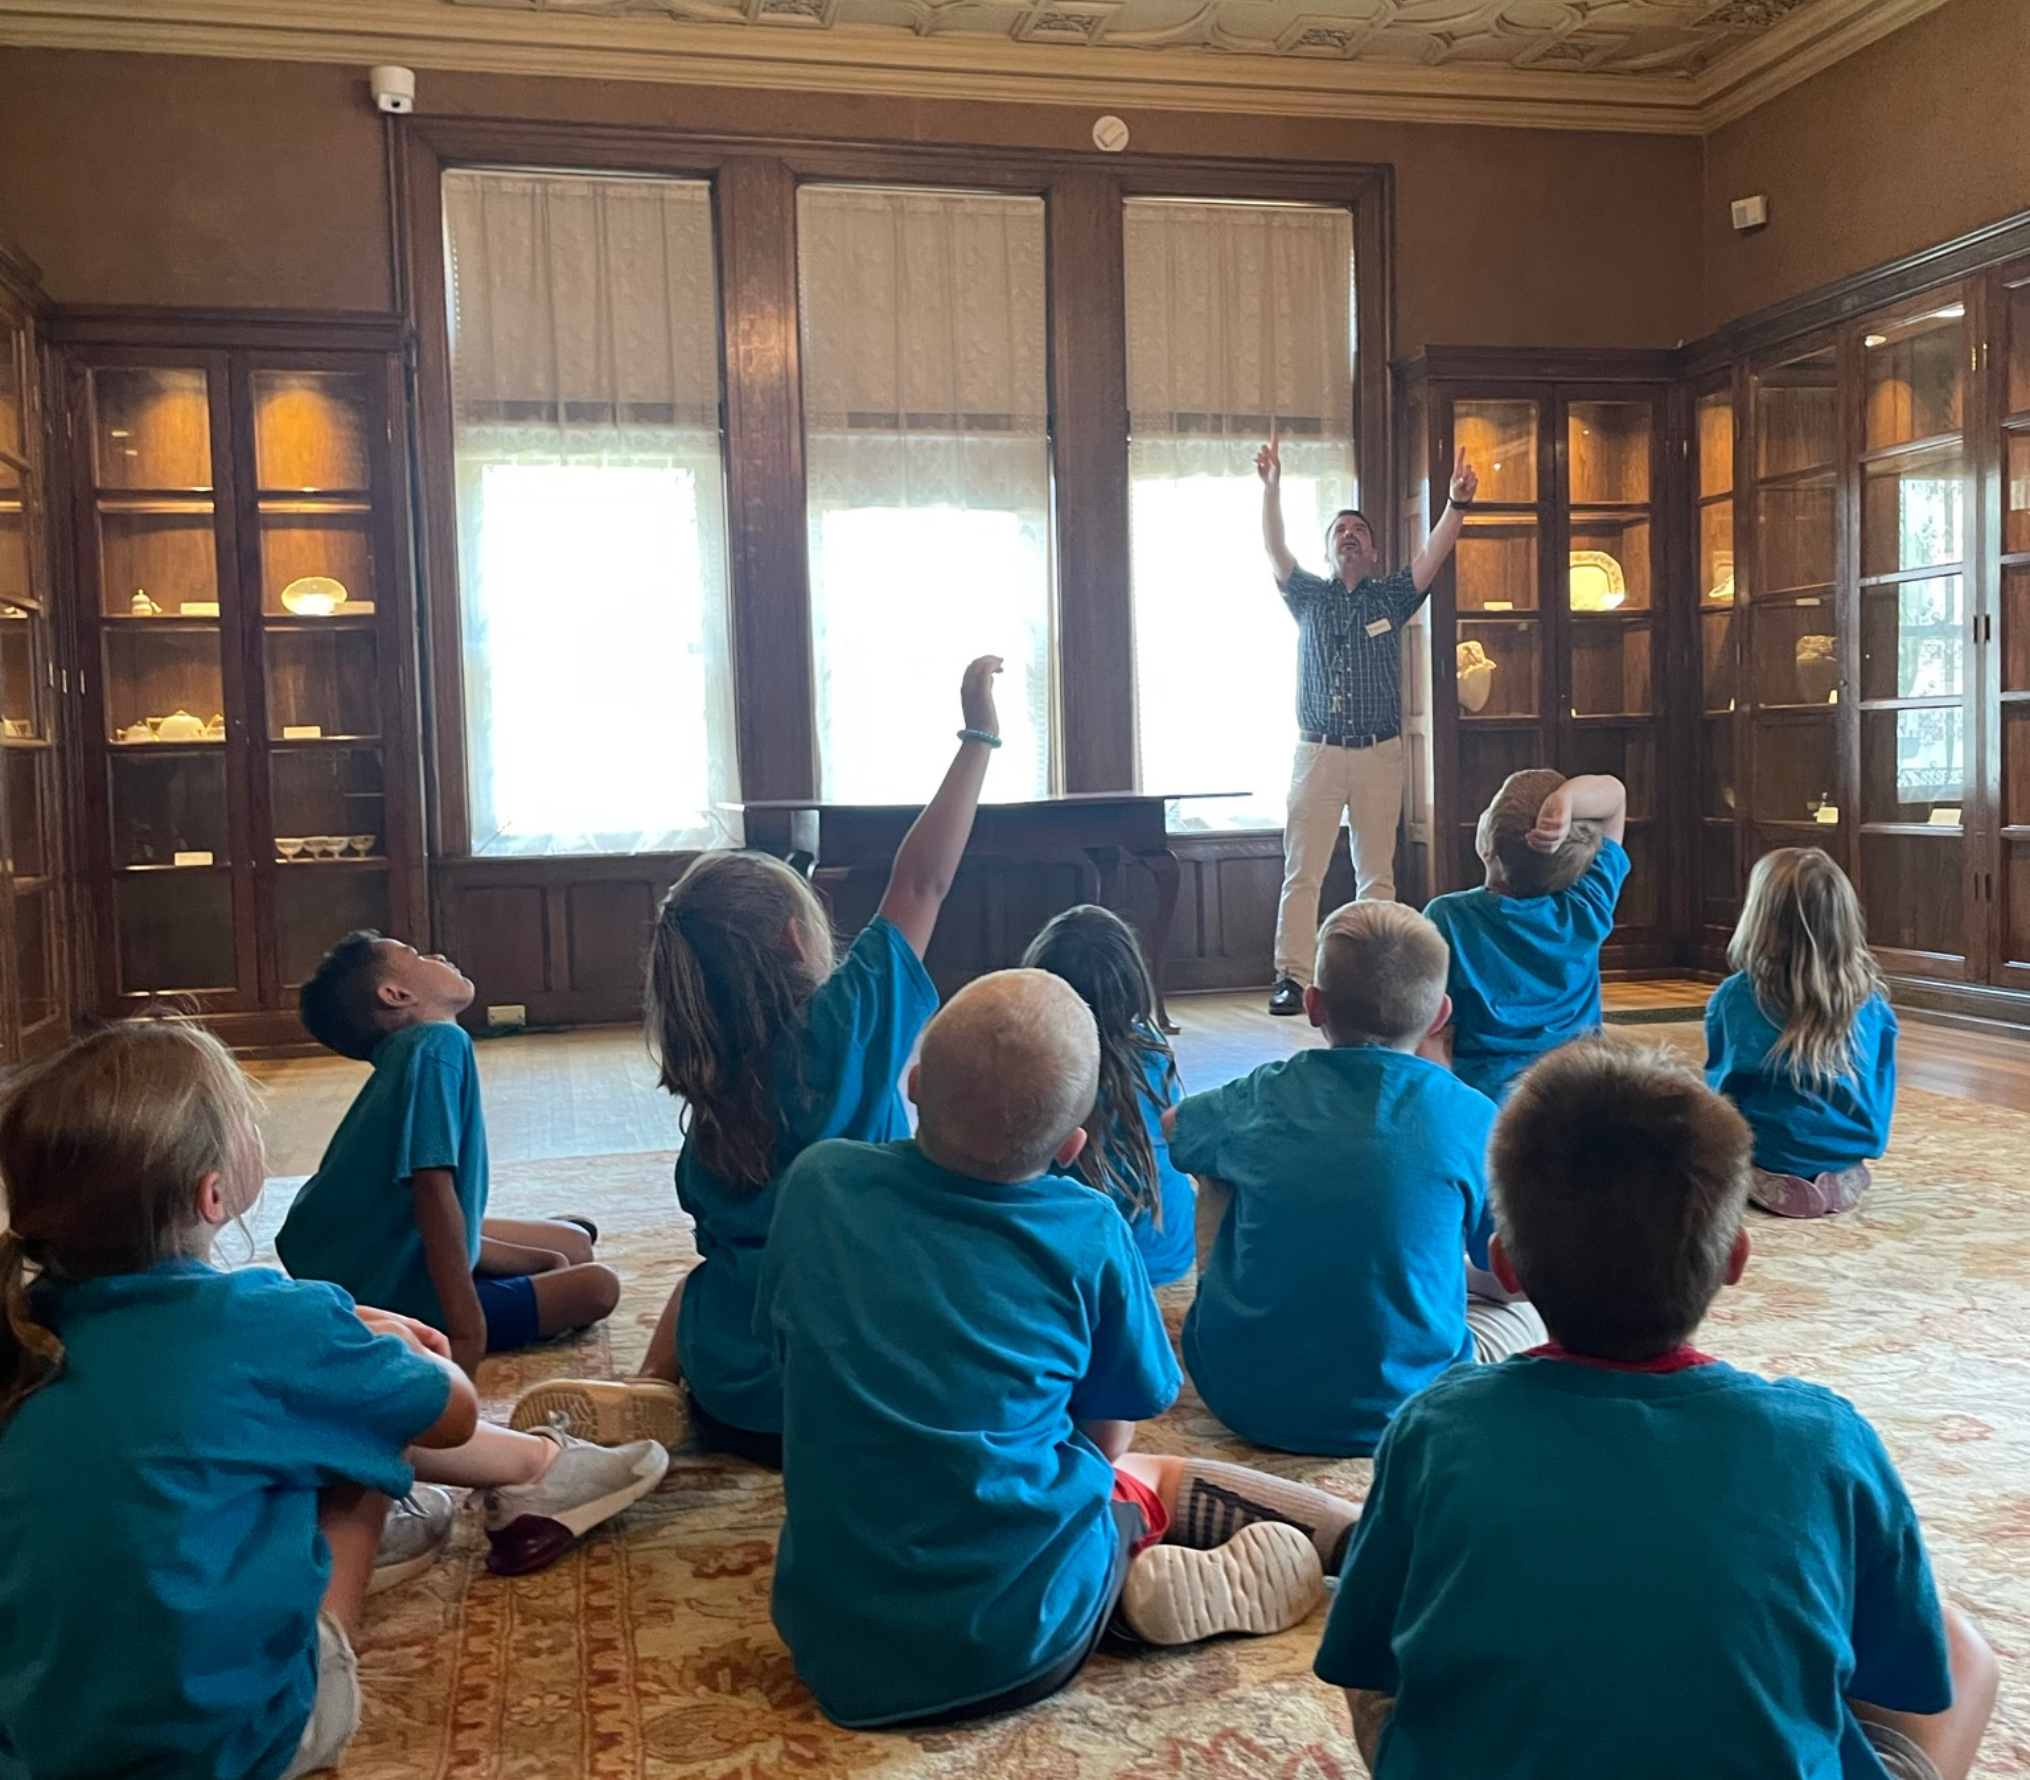 Oshkosh Public Museum staff member working with a field trip group in the Historic Sawyer Home library